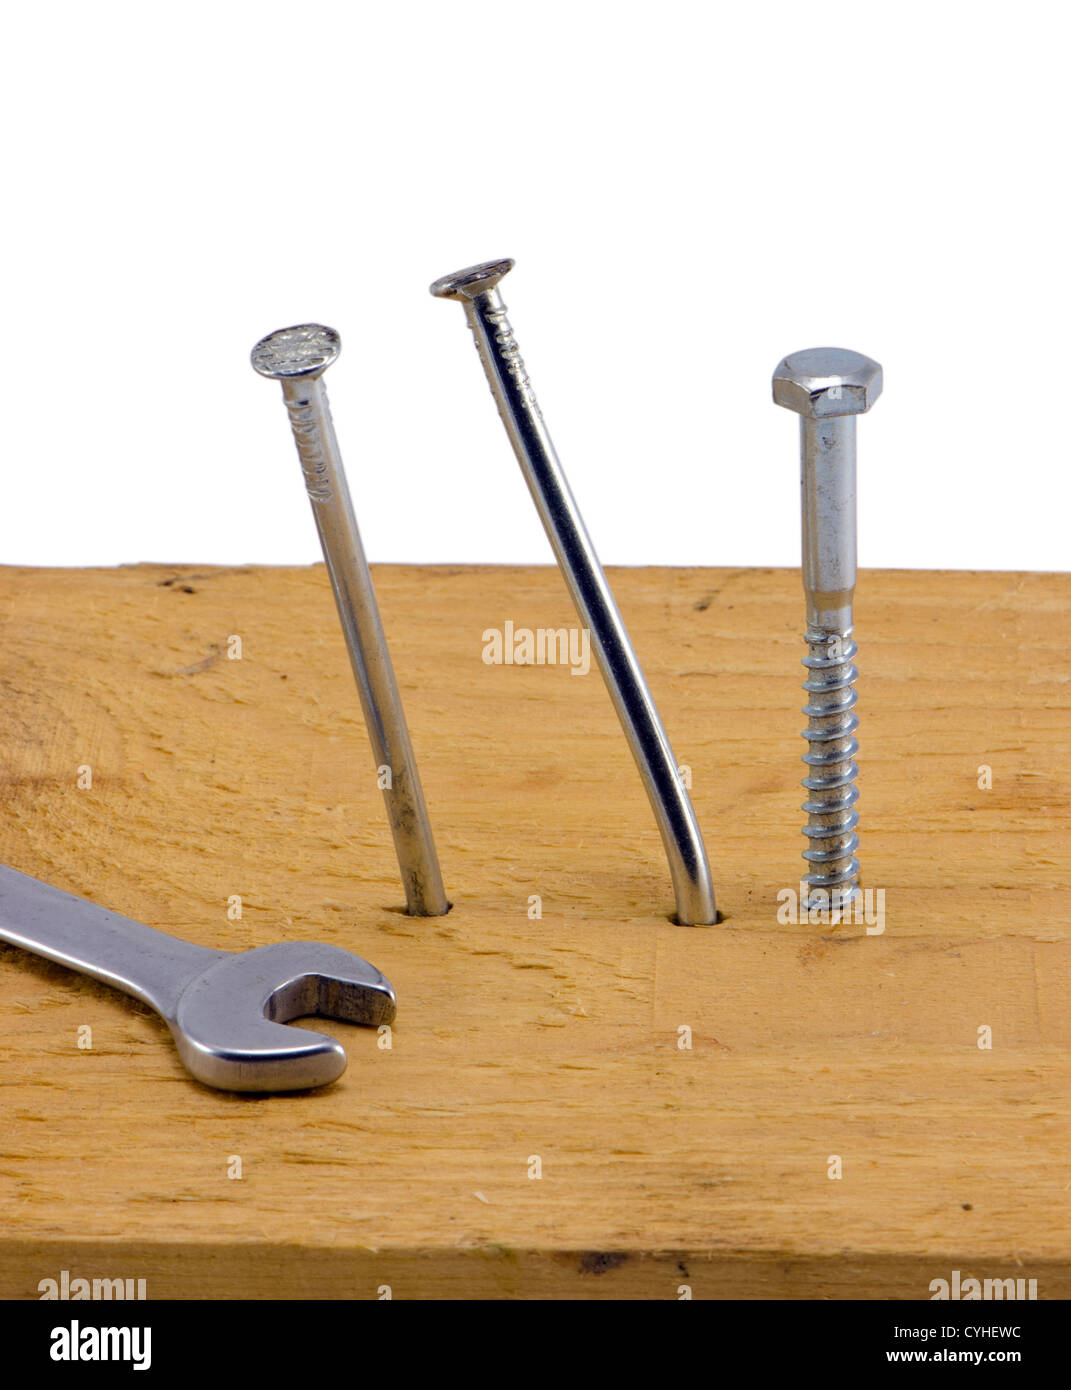 nails hammered to board bend and screw bolt with wrench tool head isolated  on white background Stock Photo - Alamy